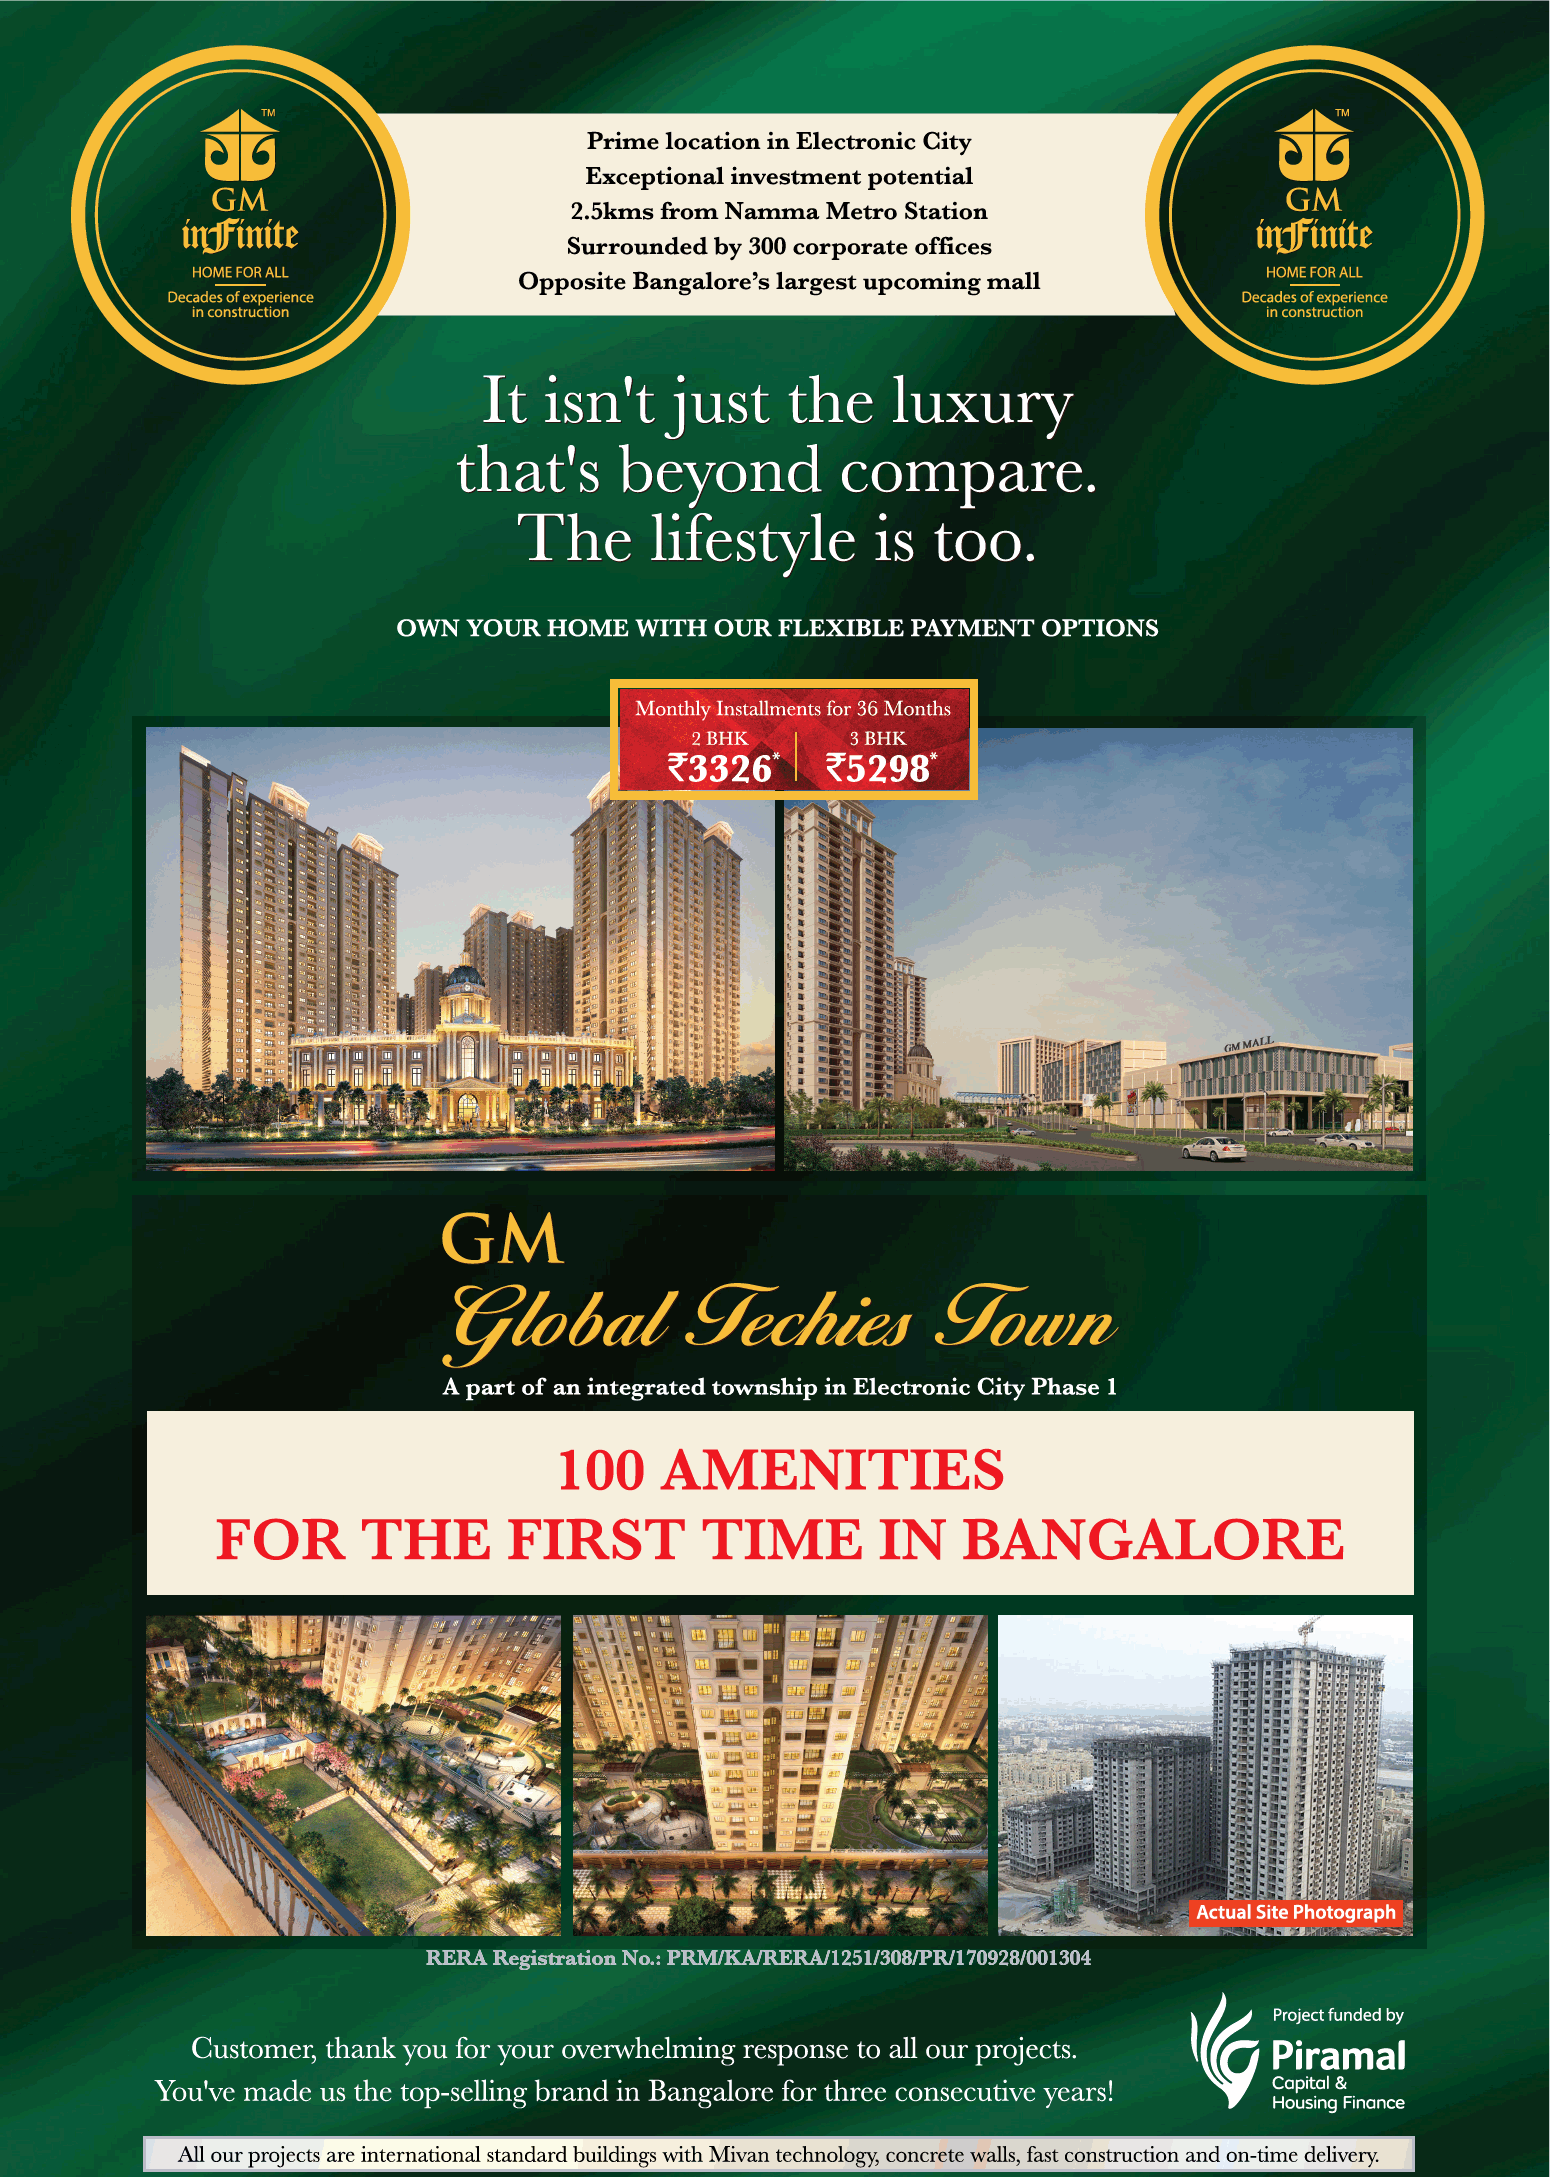 Avail 2 & 3 bhk at GM Global Techies Town in Bangalore Update